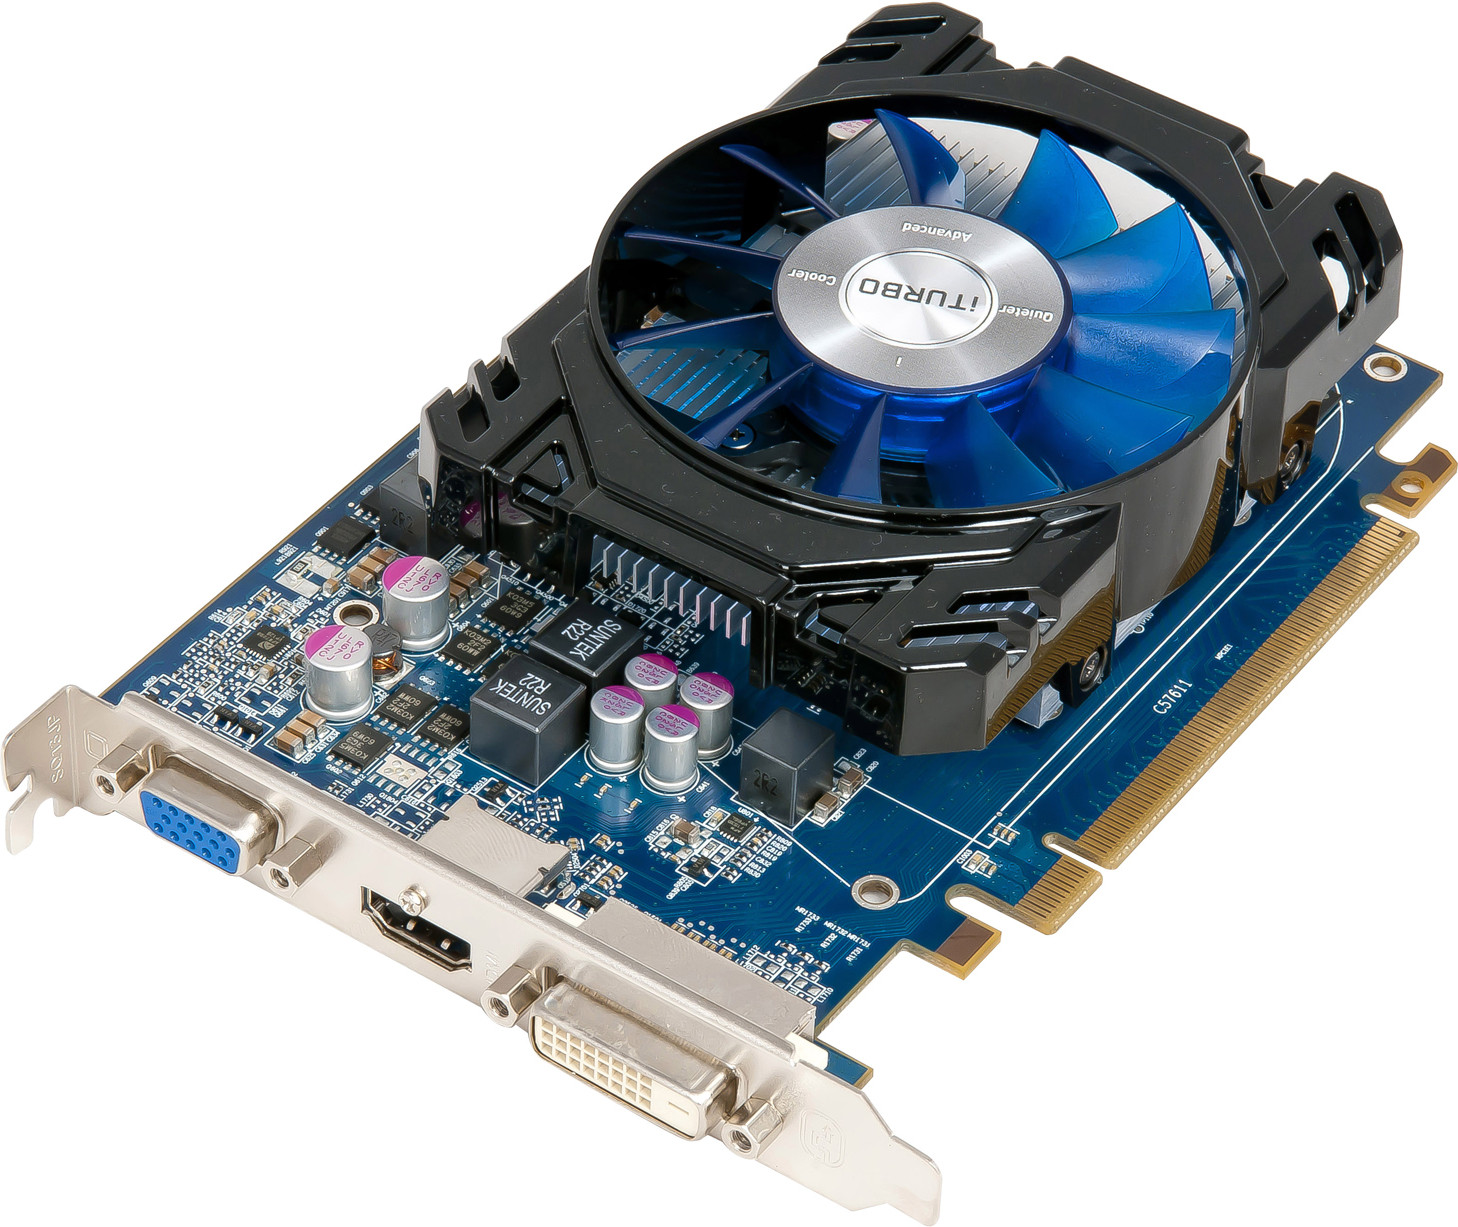 HIS launches Radeon R7 250 iCooler with 